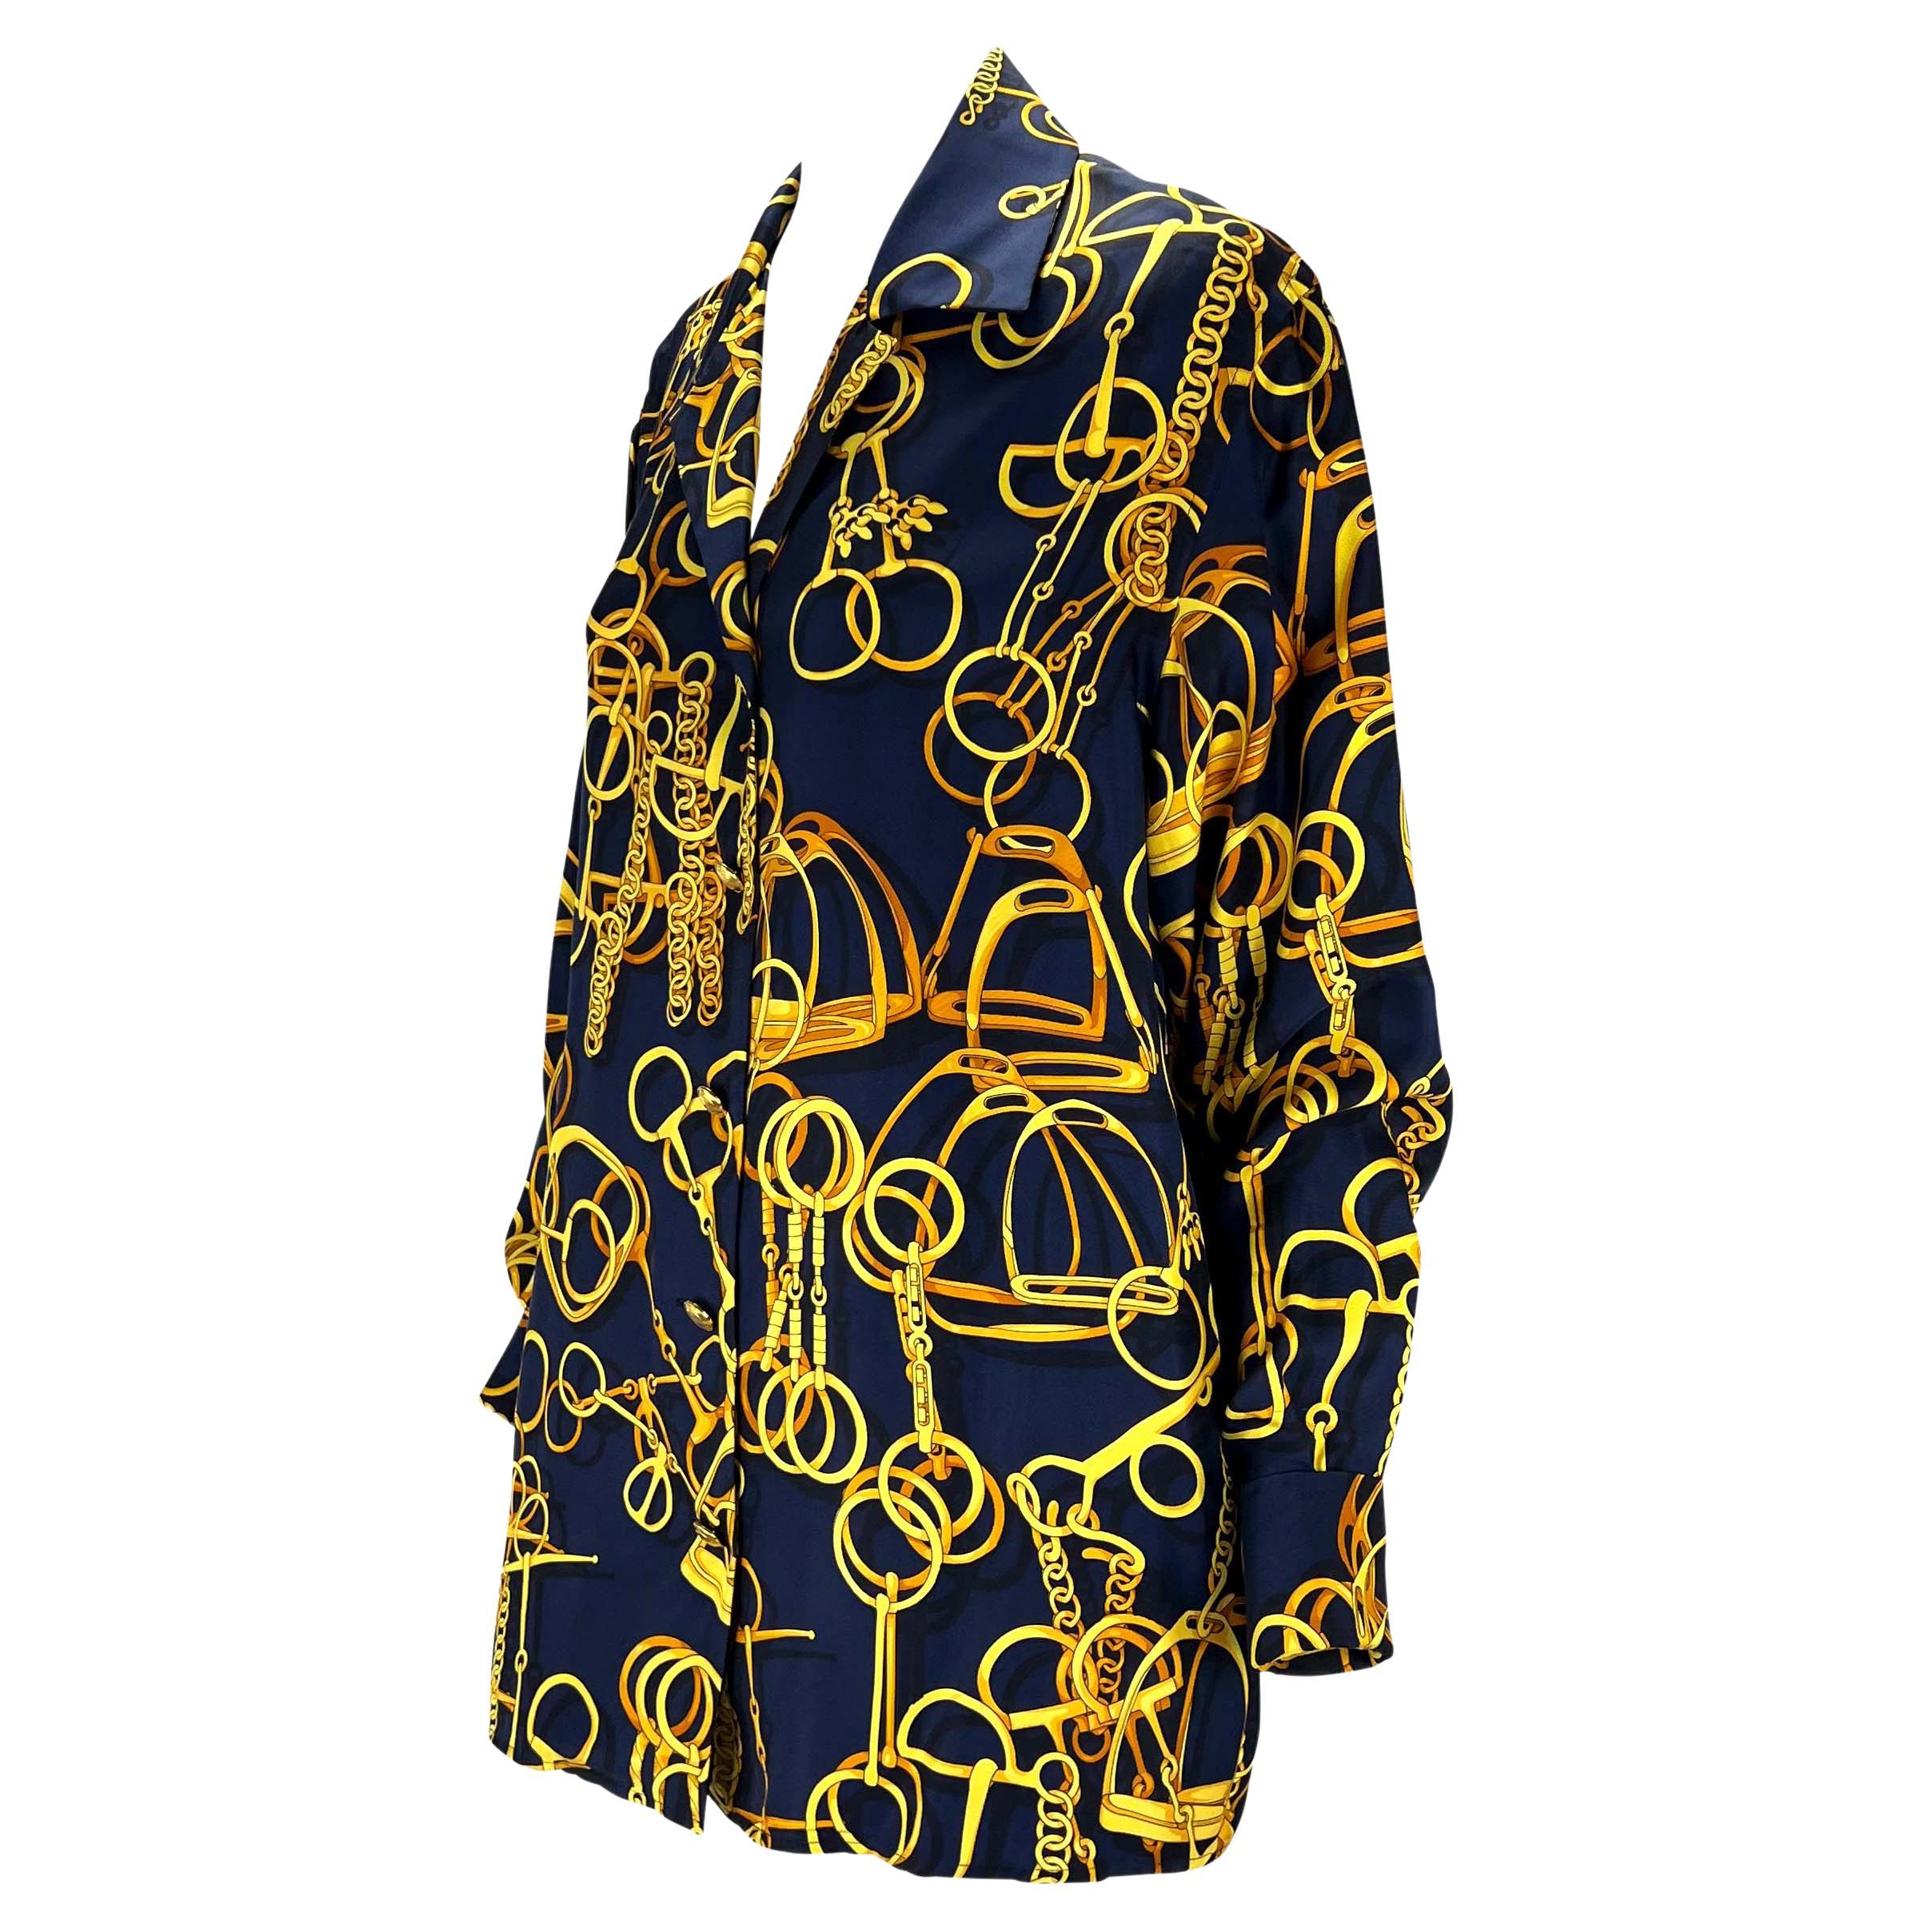 Women's S/S 1993 Gucci Navy Gold Horsebit Print Silk French Cuff Blouse Linen Pants For Sale